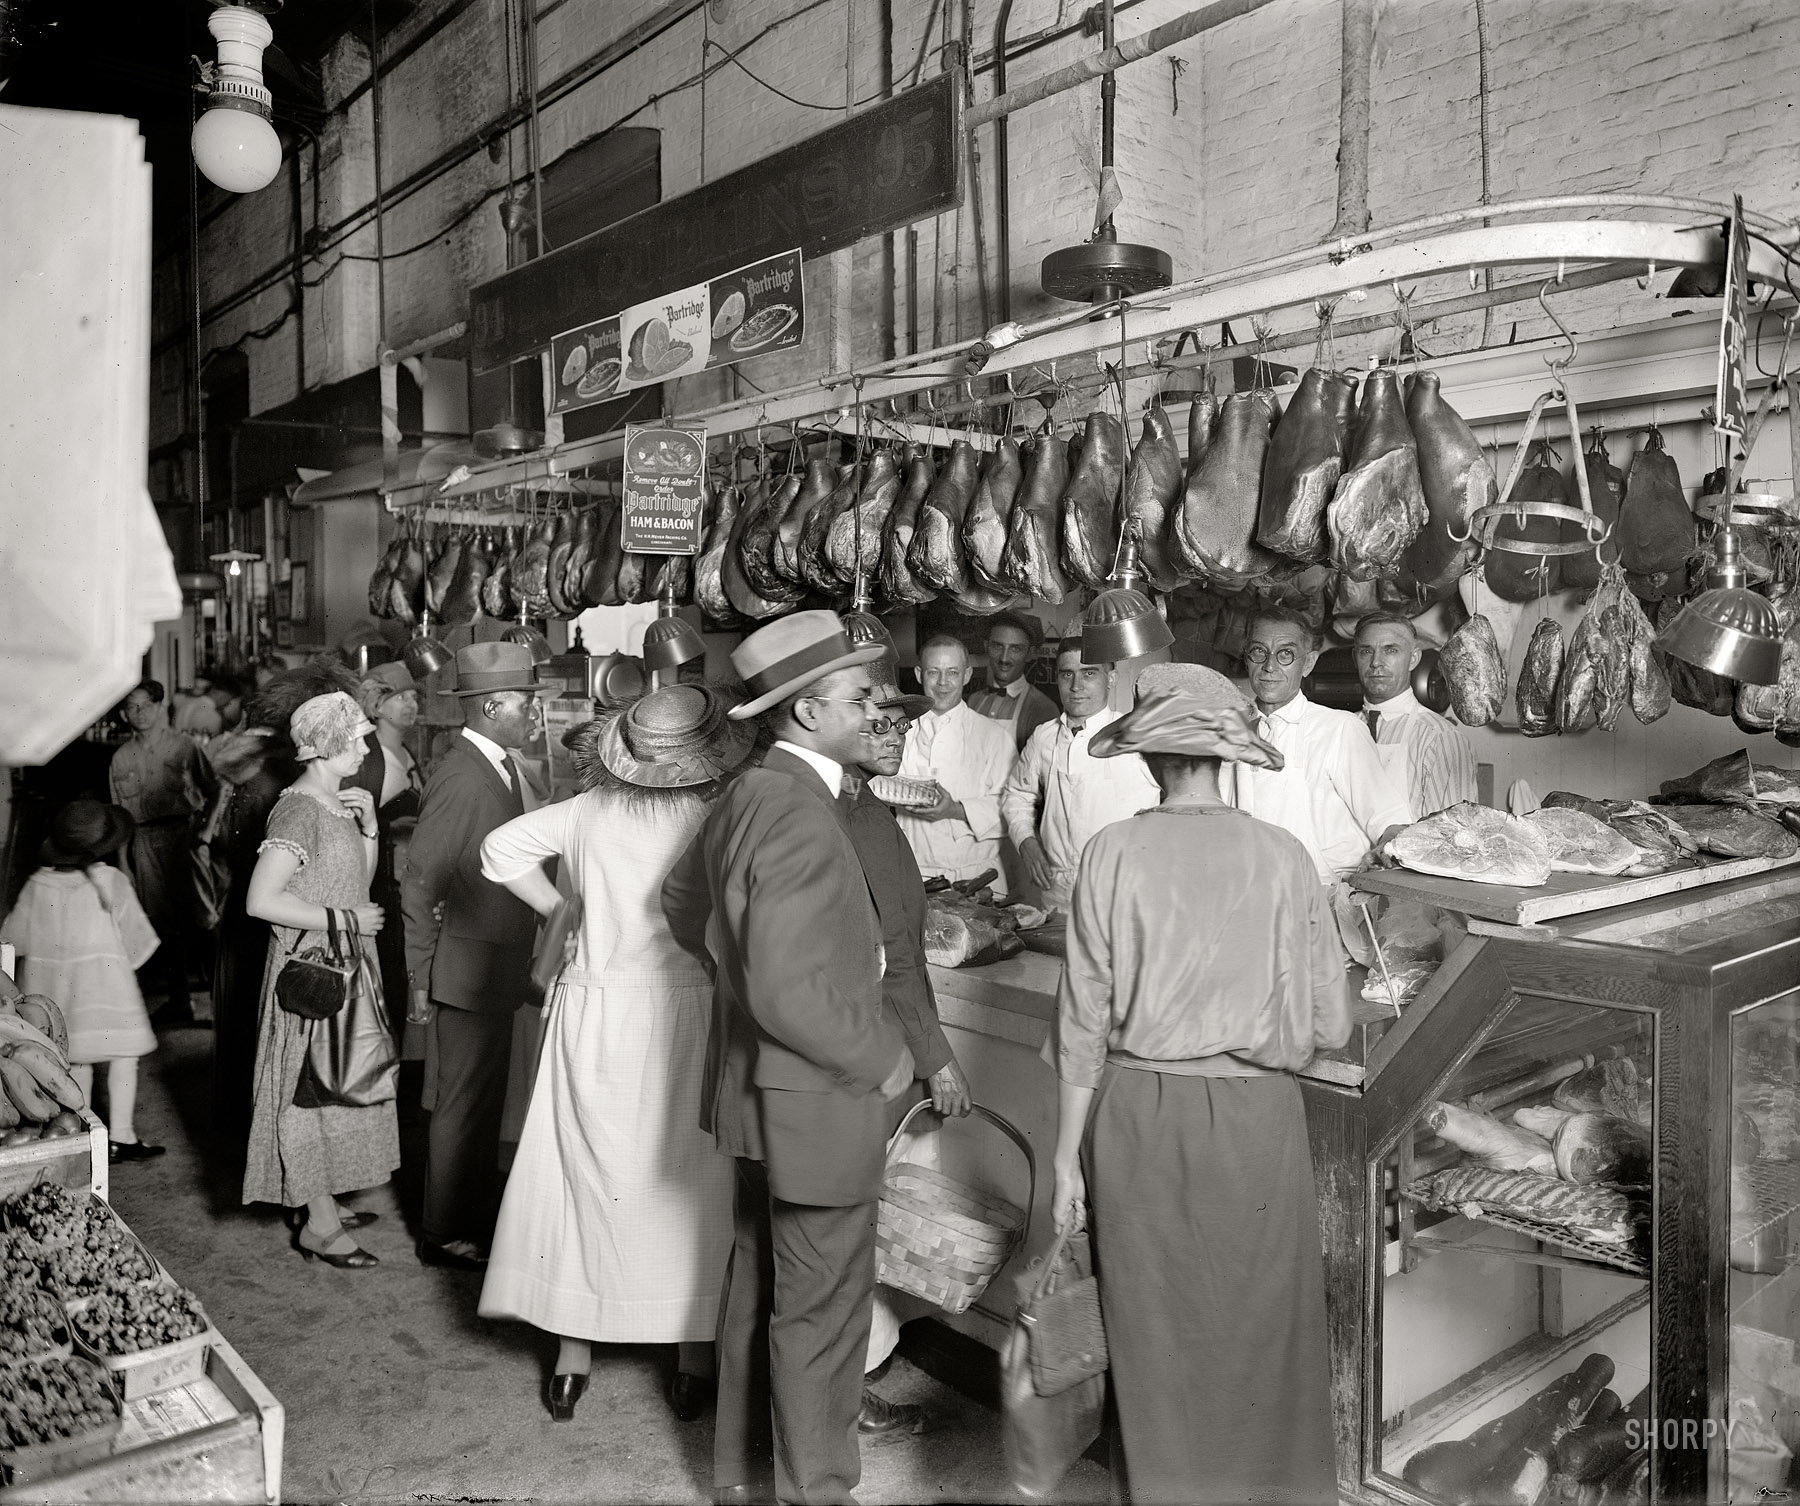 "D.D. Collins." Another circa 1925 scene from the O Street Market in Washington. Who wants ham? National Photo Co. Collection glass negative. View full size.